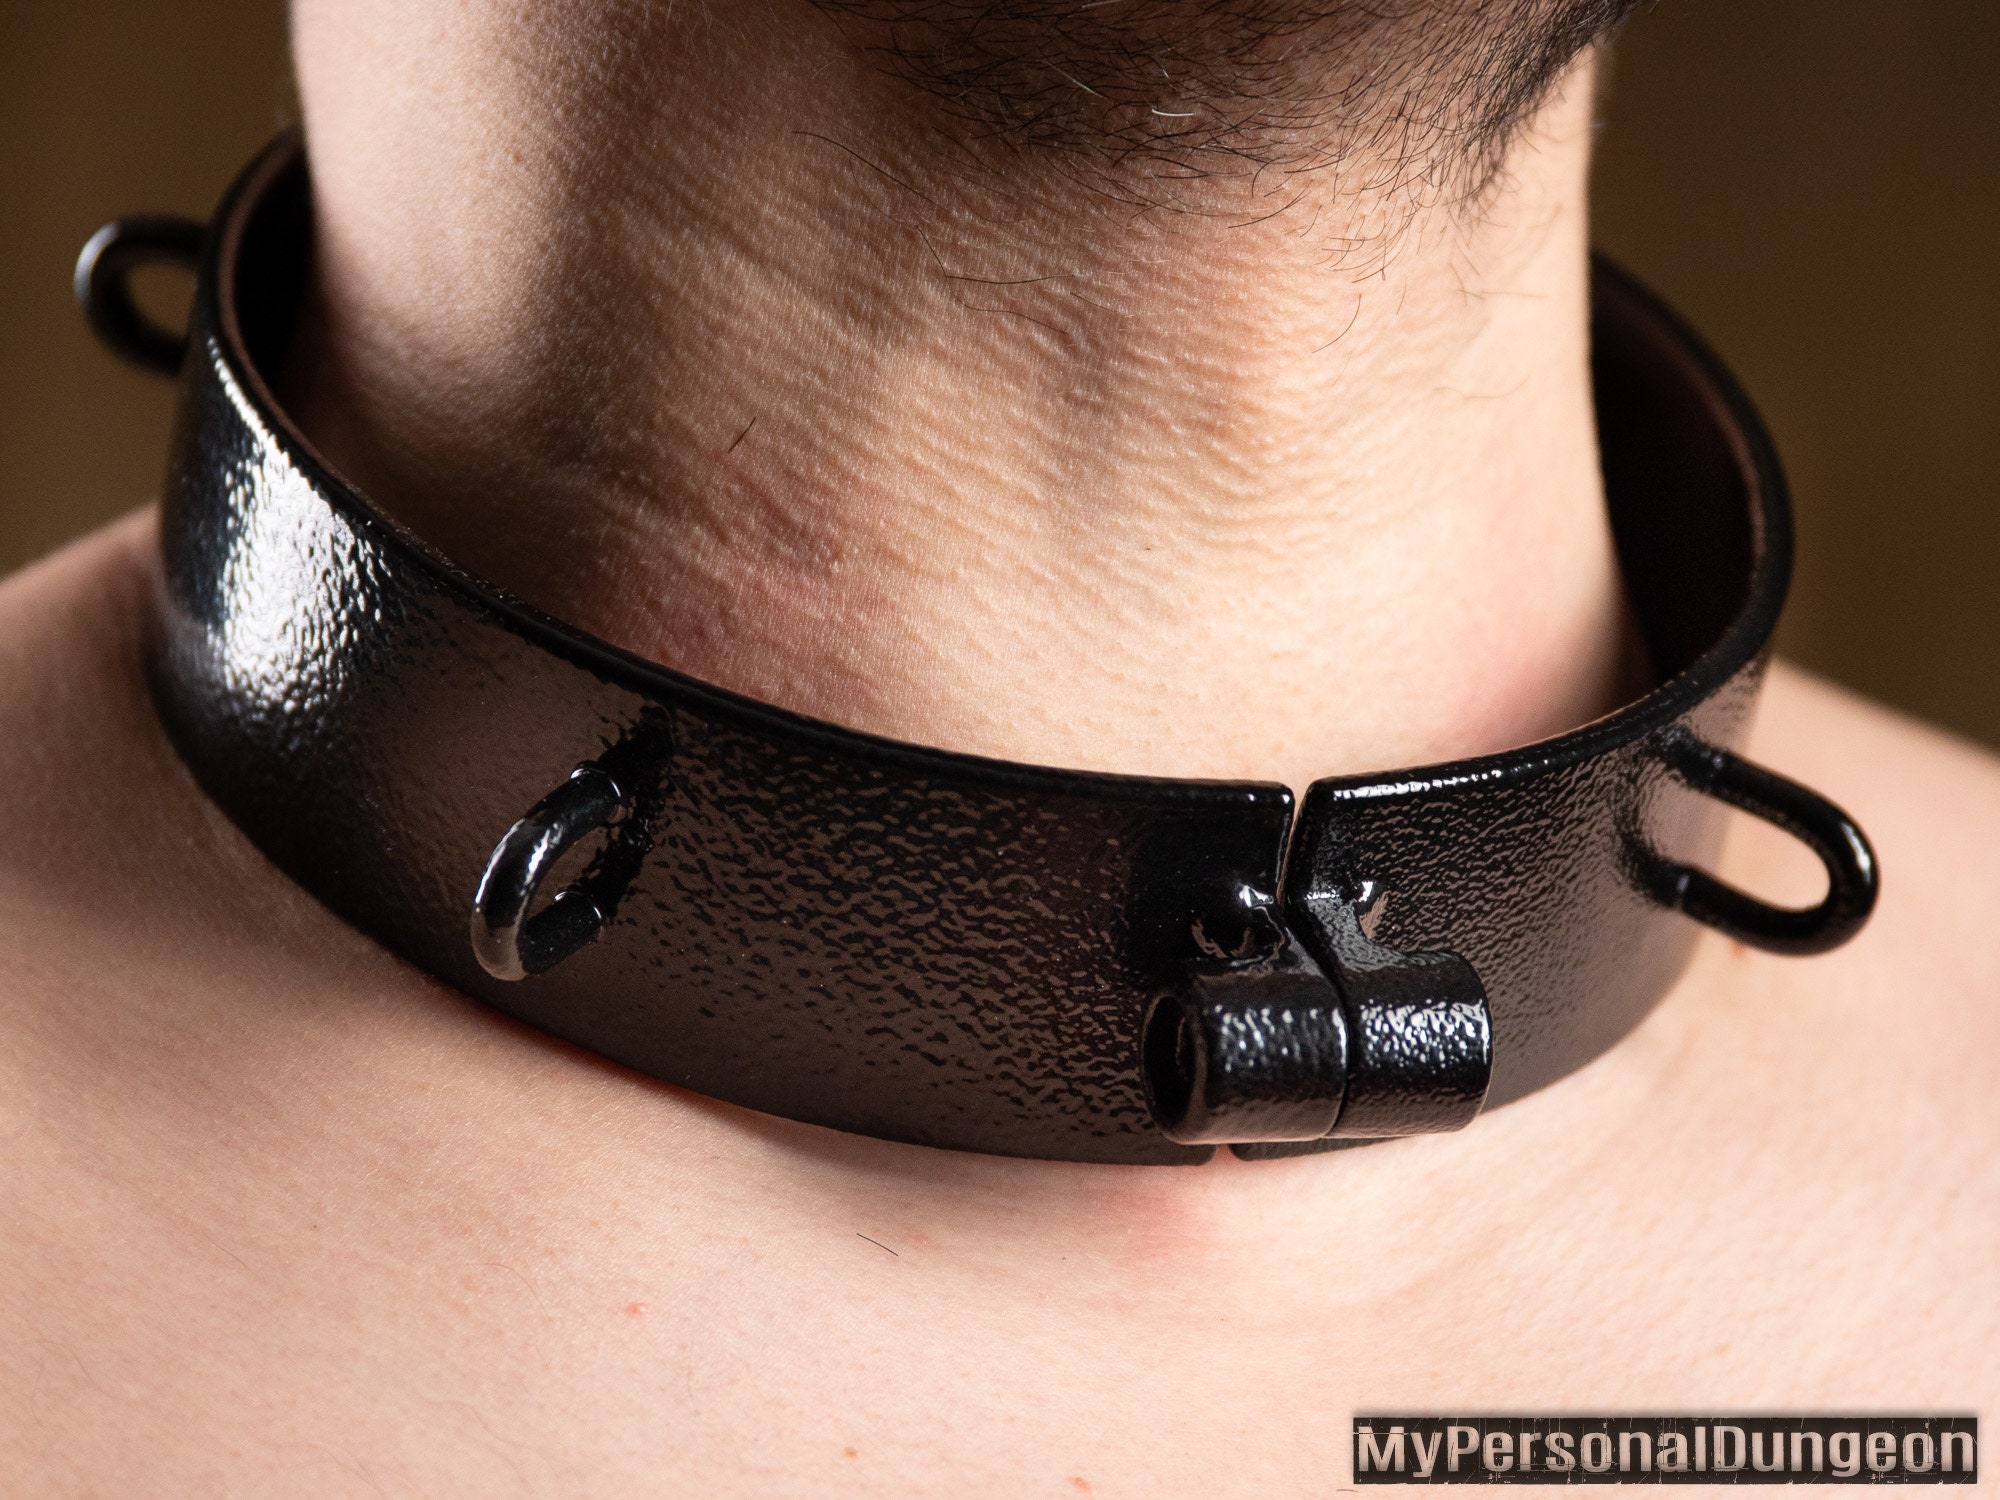 Steel Neck Shackle collar for BDSM Play image